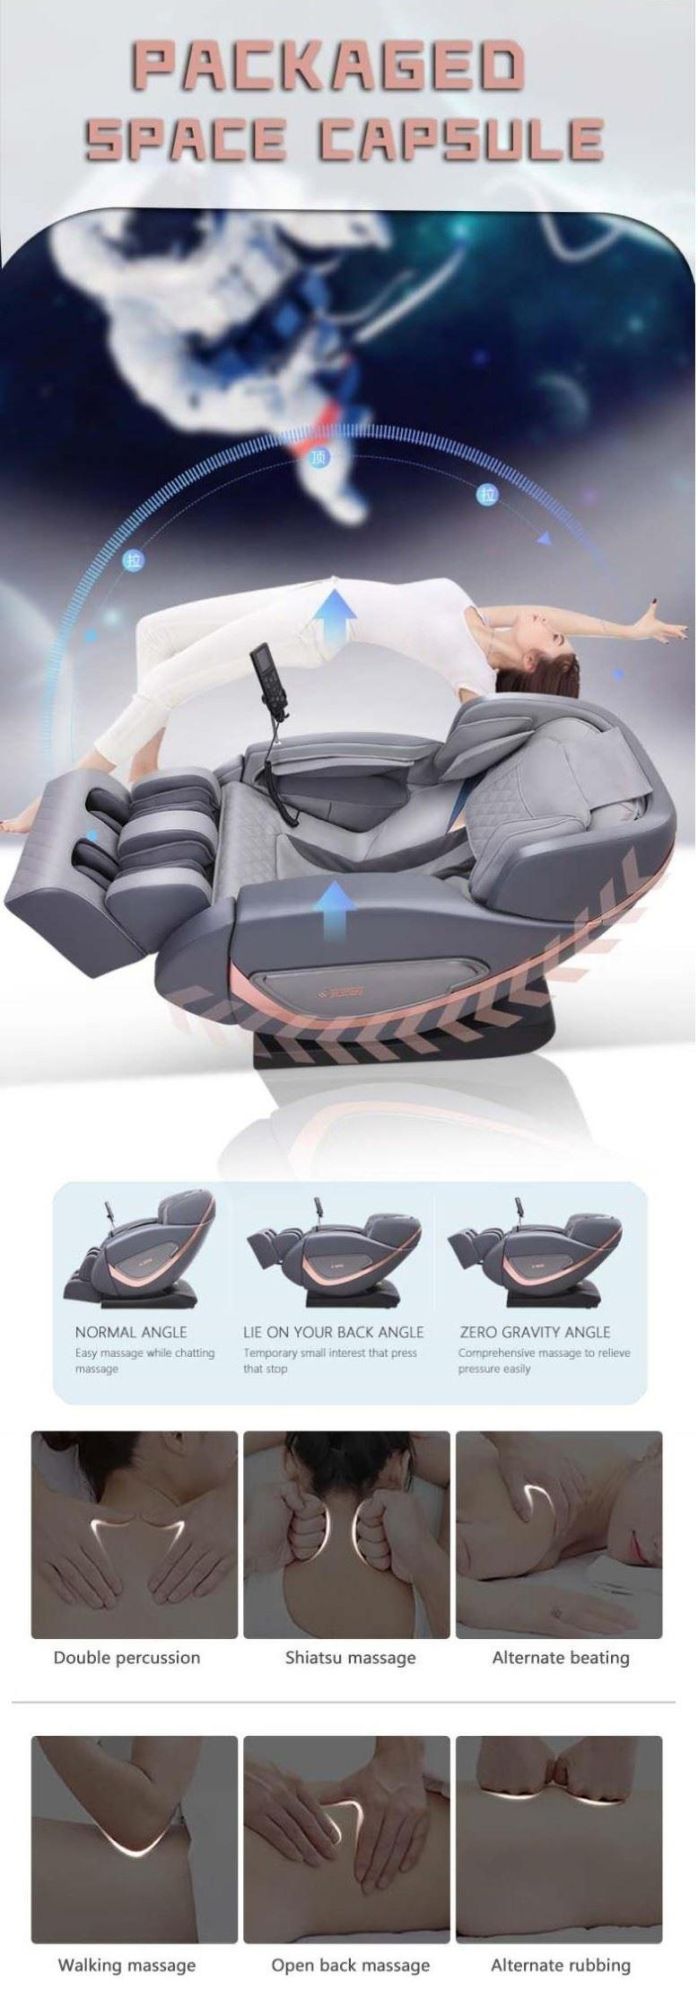 New Wantong Model Full Body 3D Zero Gravity SL Track 4D Full Body Massage Chair Zero Gravity Recliner Massage Chair with Music for Sale